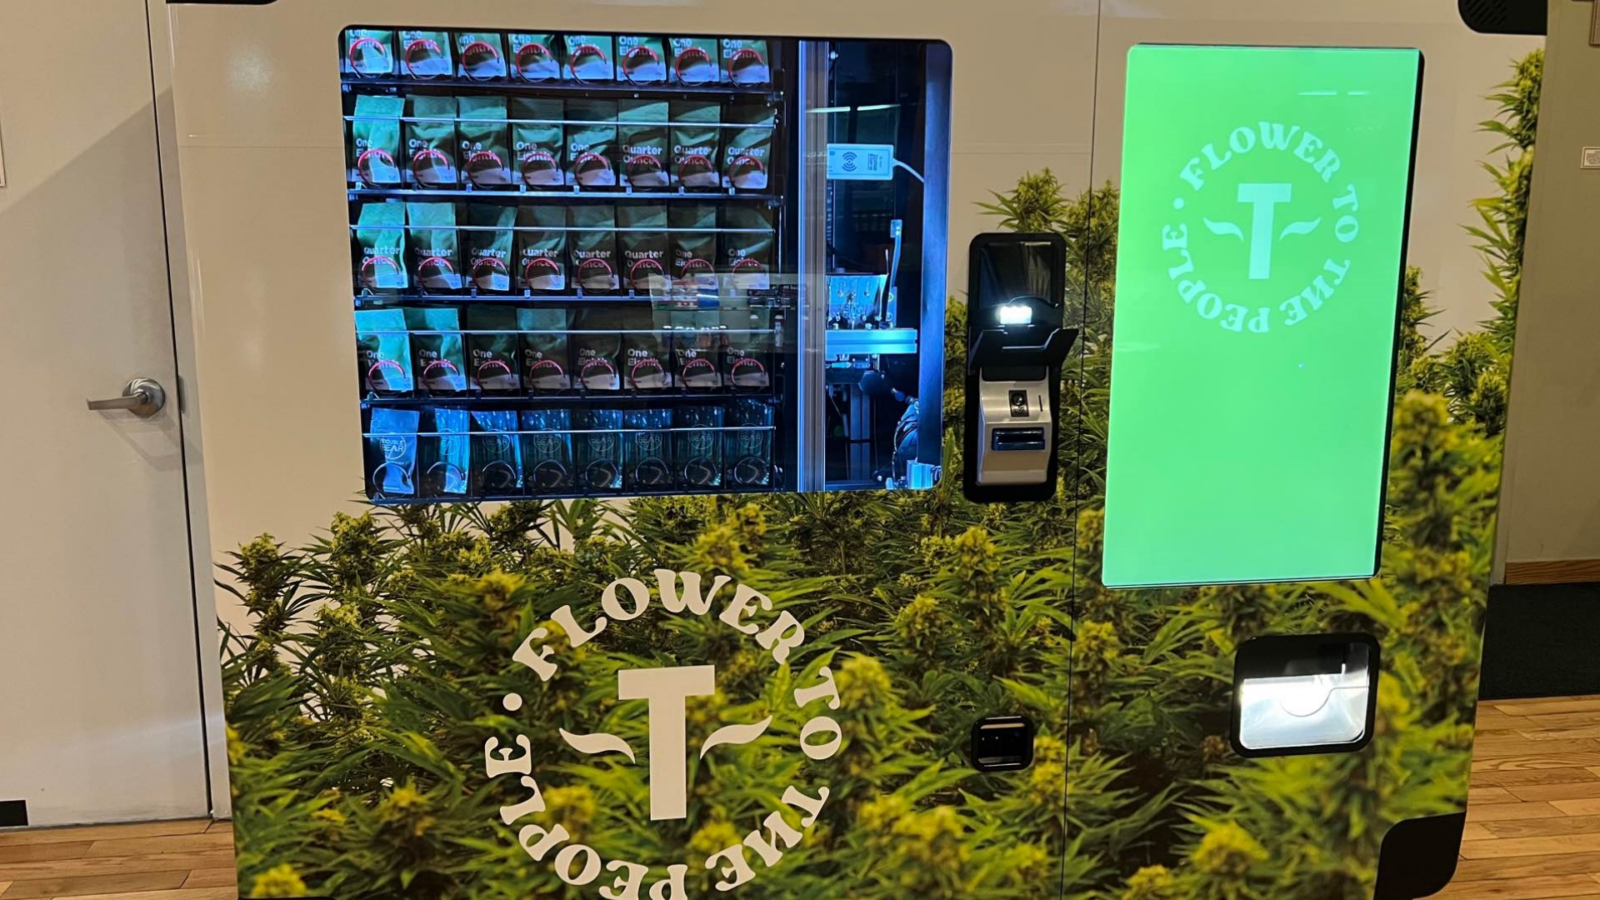 Weed Vending Machine That Live-Labels, Bags Hits Colorado City